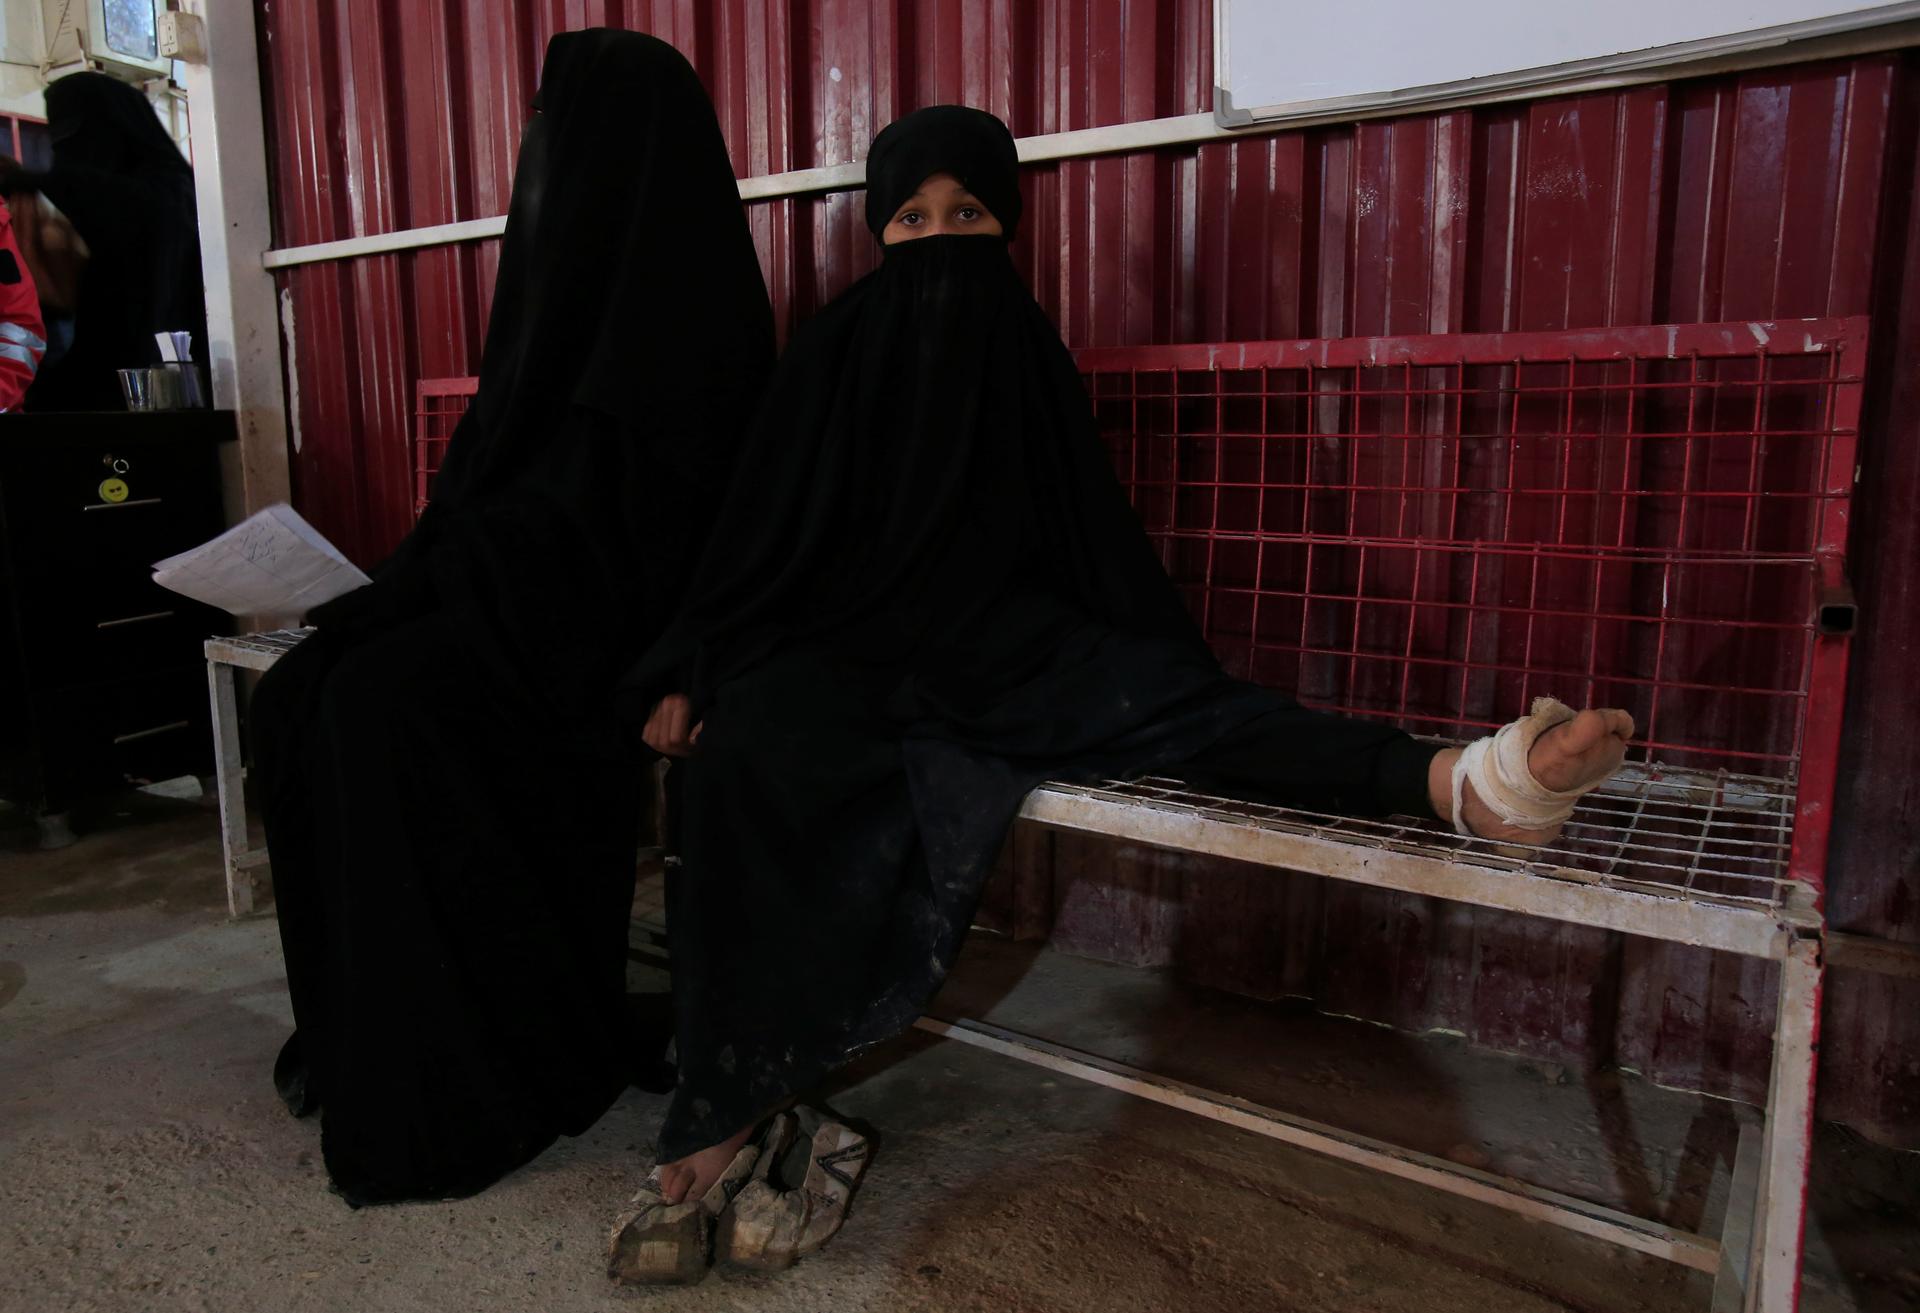 Two girls wearing black clothing sit on a bench in a clinic, one has a wounded foot wrapped in bandage